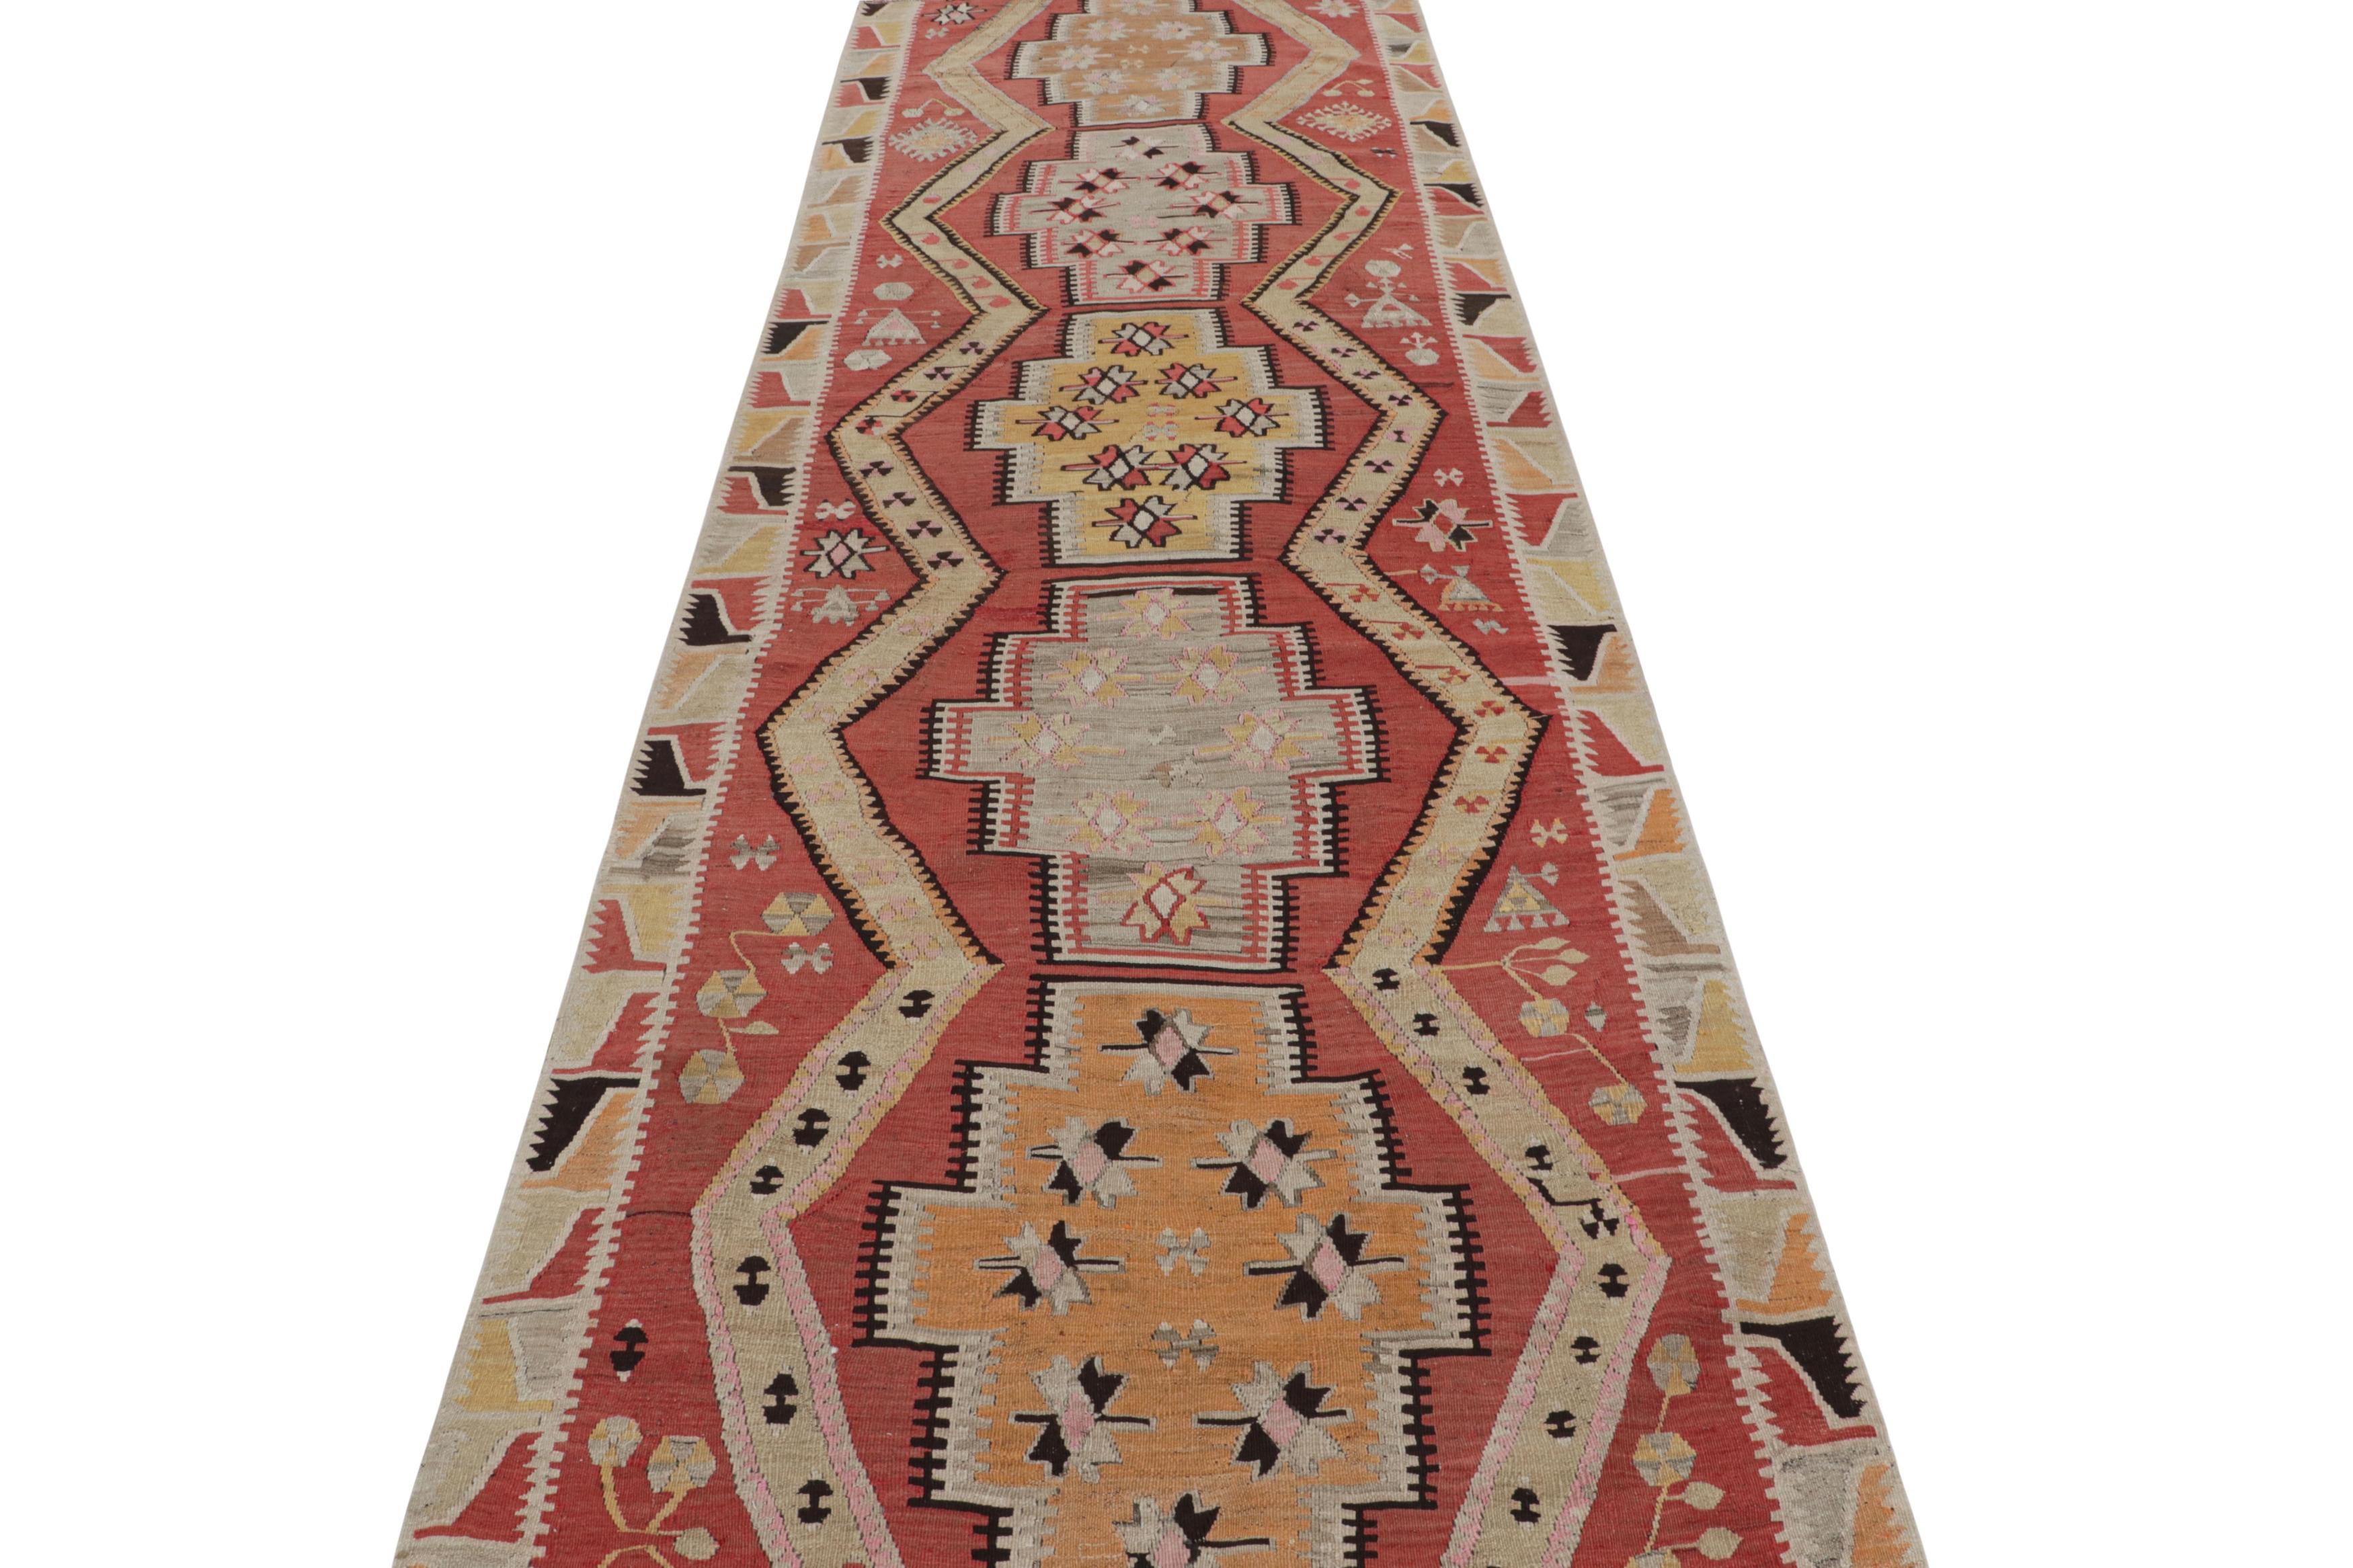 Vintage Kayseri Red and Golden-Yellow Wool Kilim Rug by Rug & Kilim In Excellent Condition For Sale In Long Island City, NY